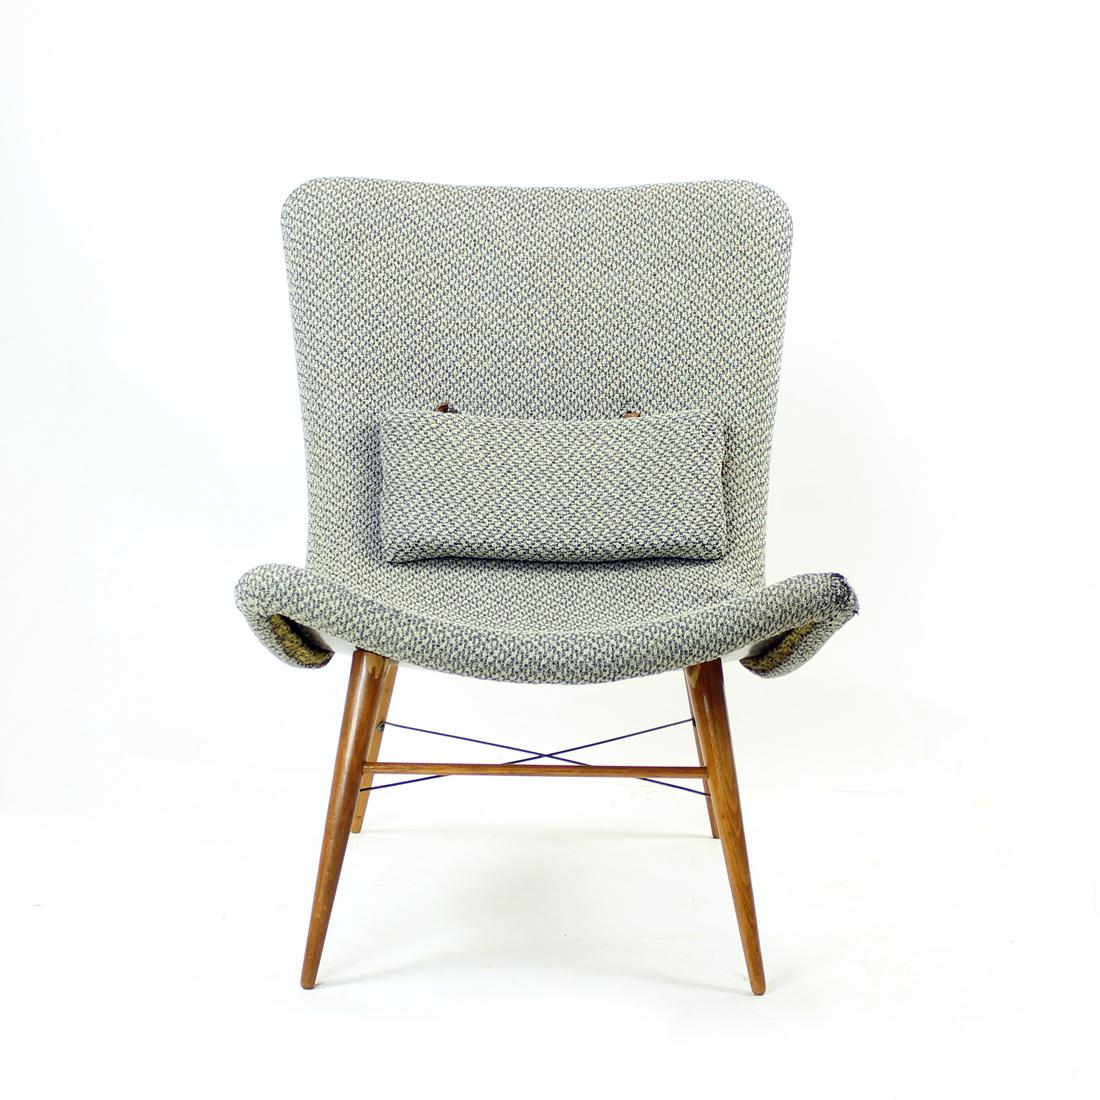 Iconinc midcentury design lounge chair by Miroslav Navratil, produced by Cesky Nabytek in Czechoslovakia in 1959. Part of the original sticker visible.The model was designed for Trienalle in Milano where the Czechoslovakian designers scored gold